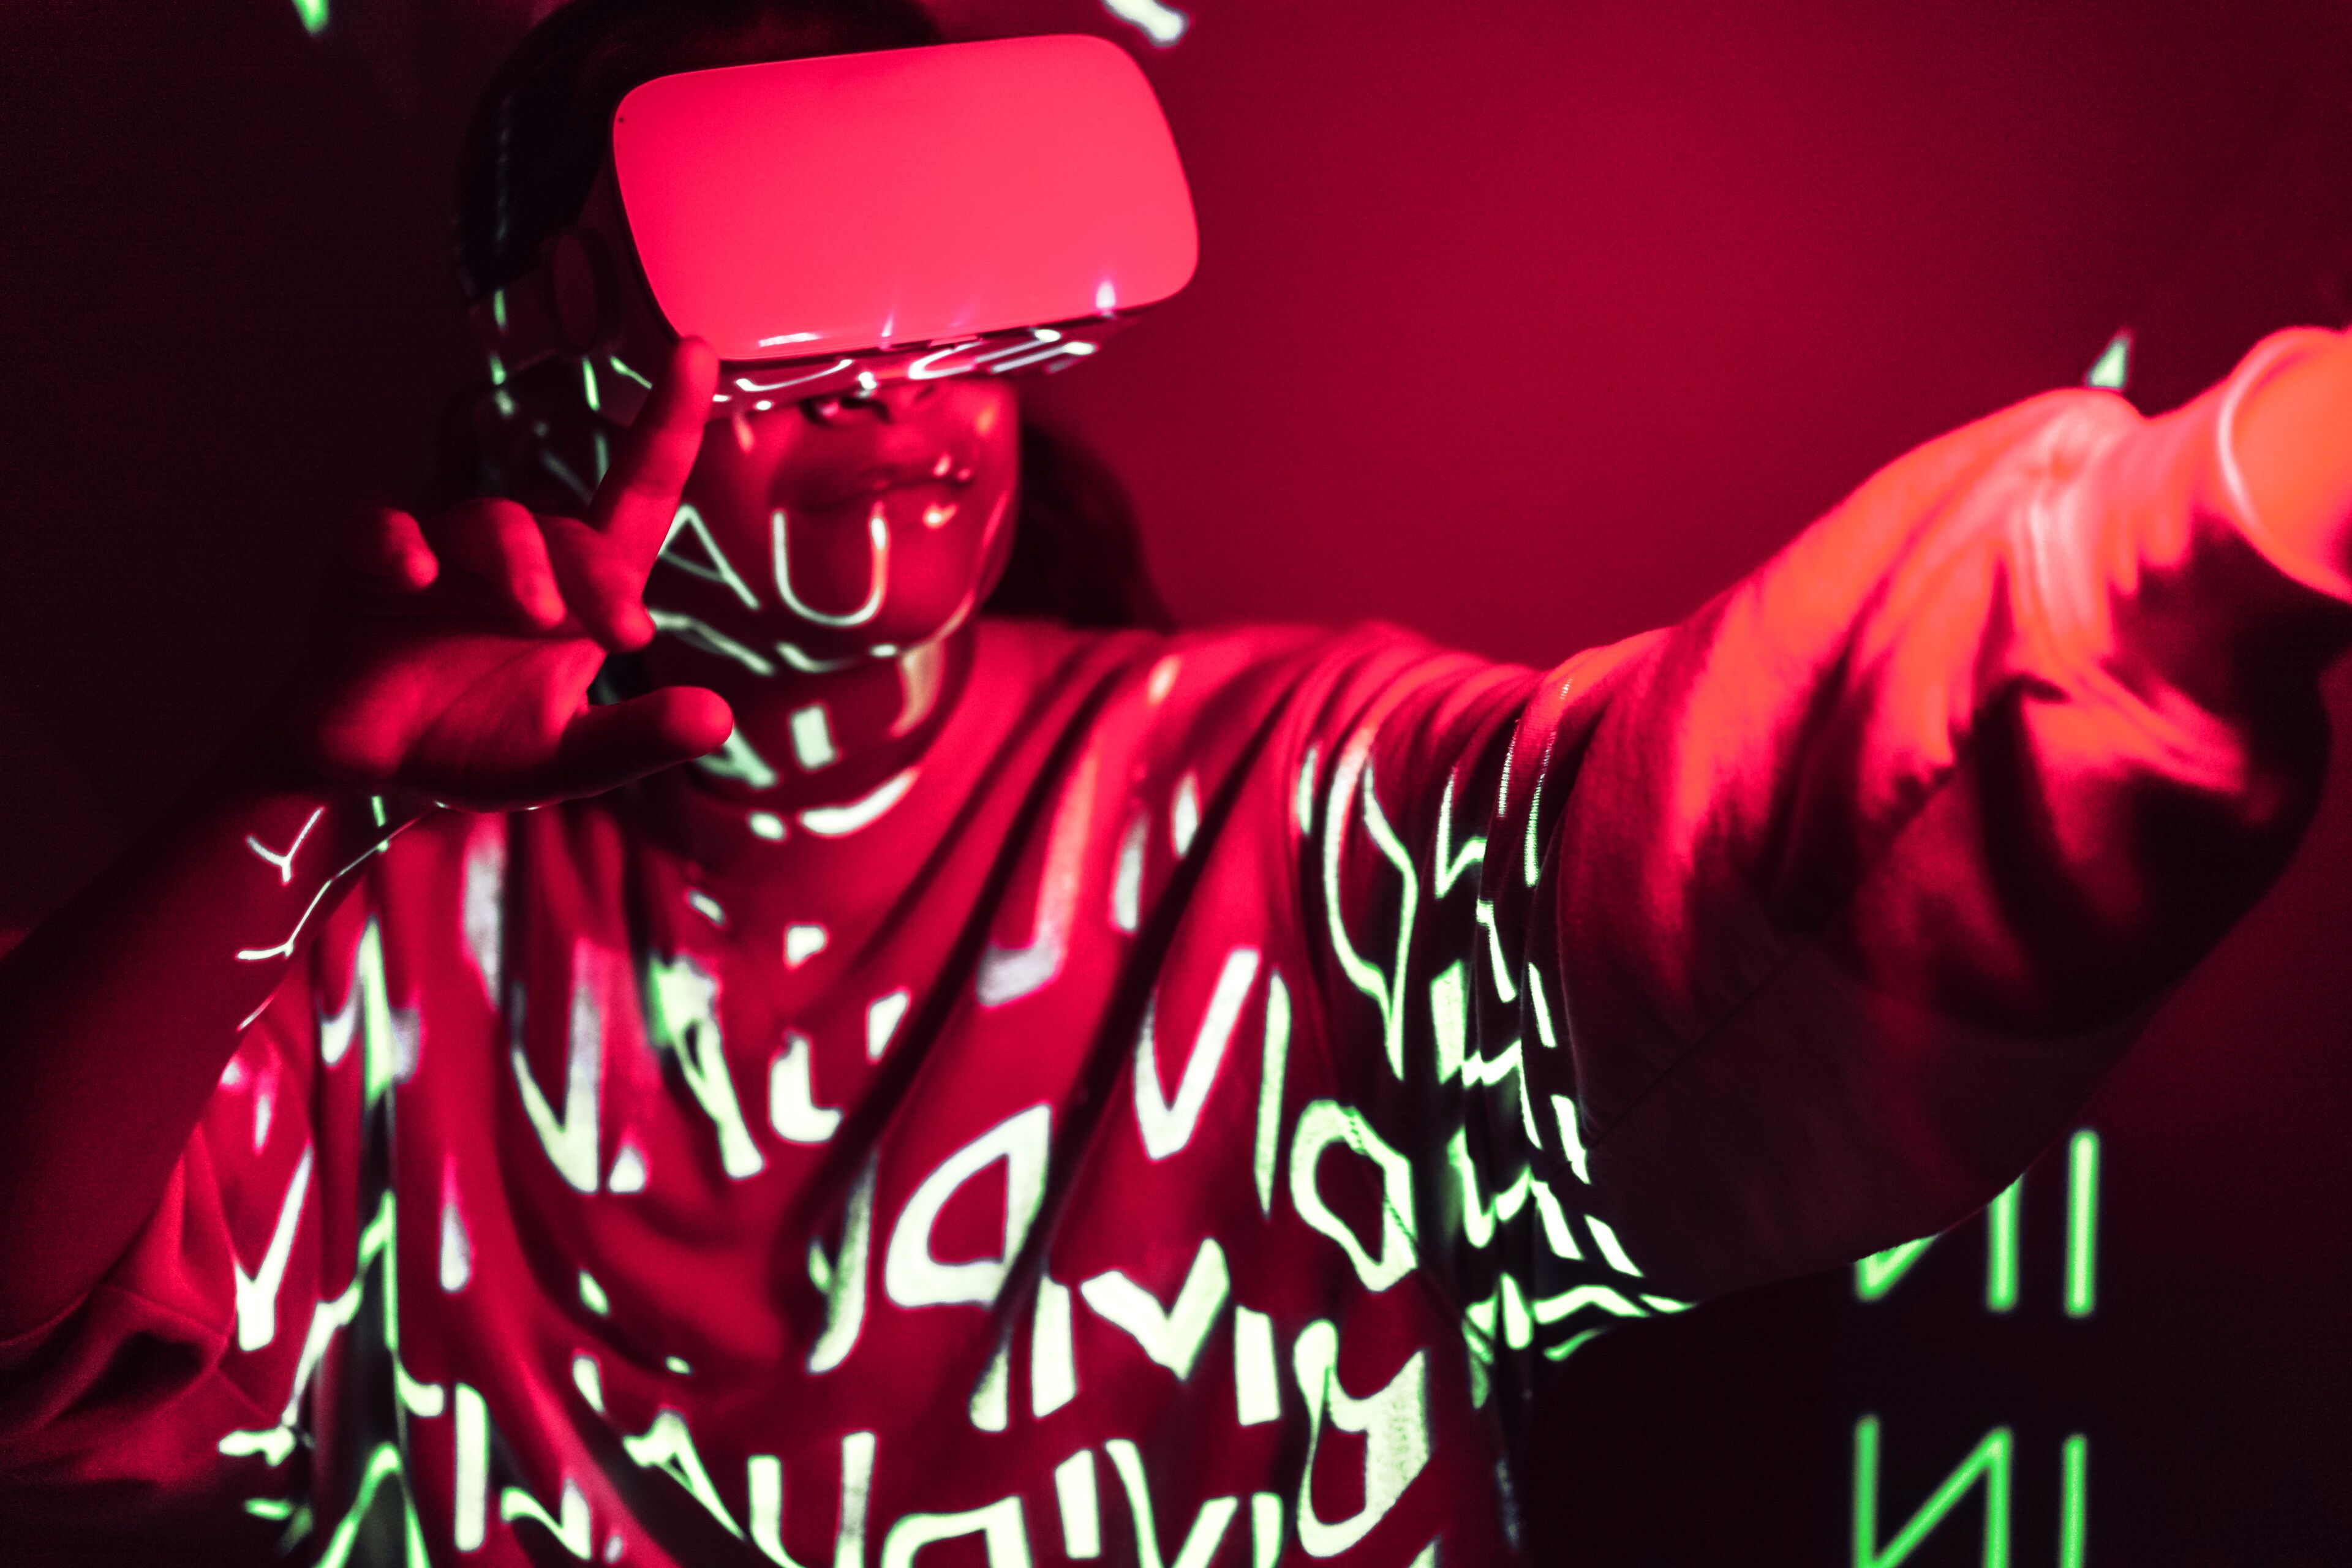 An individual immersed in a virtual reality simulation, with glowing projections casting intricate patterns over them.